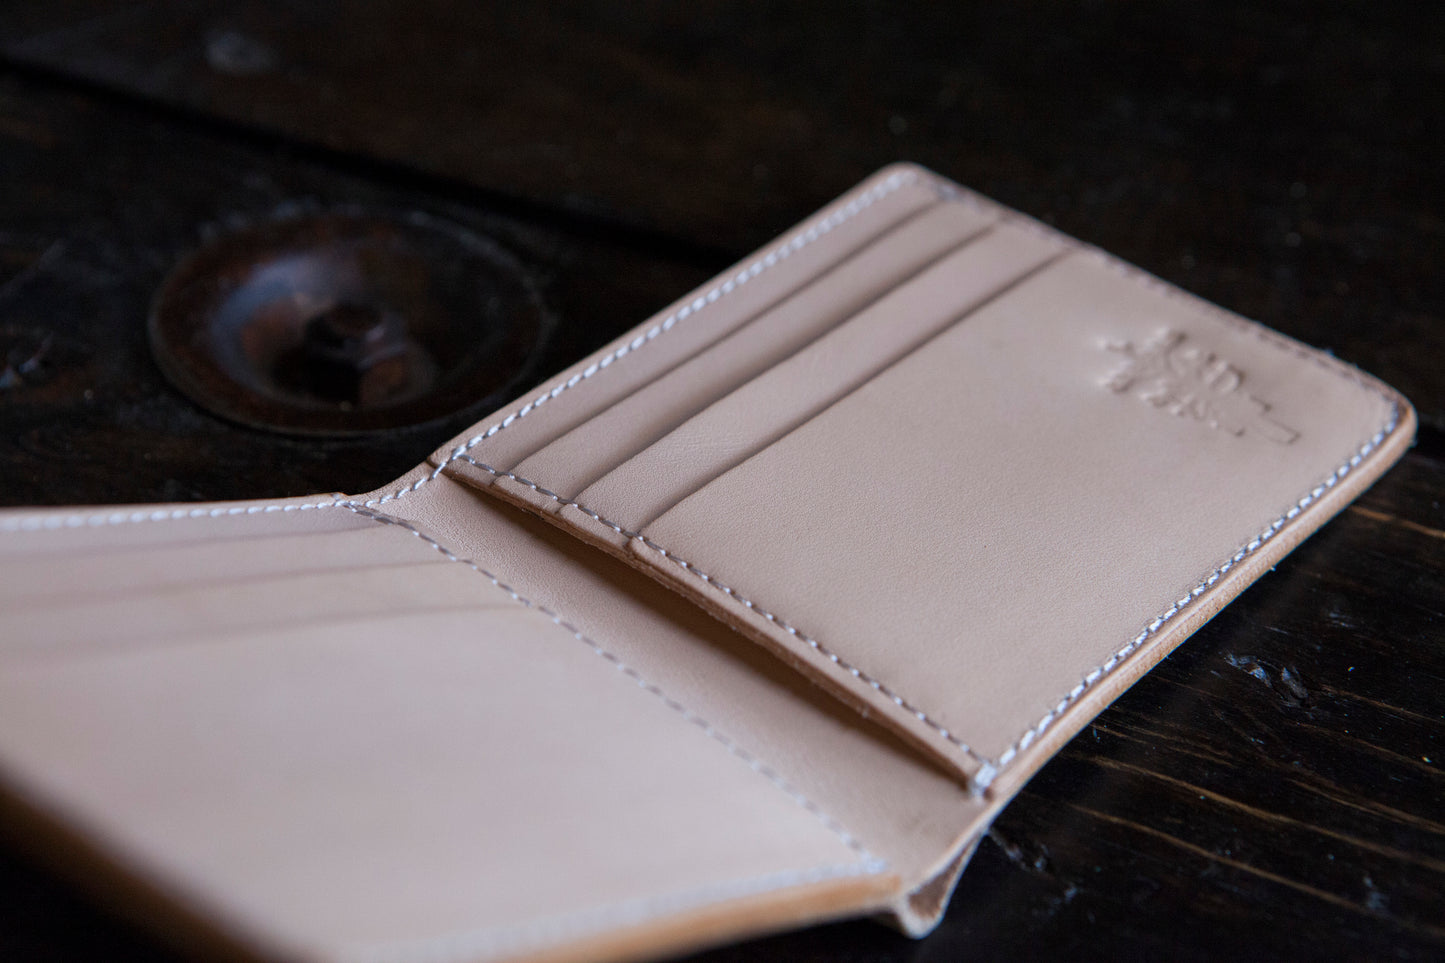 Indigo Dyed Natural Vegetable Tanned Leather Bifold with Deep Indigo Dip